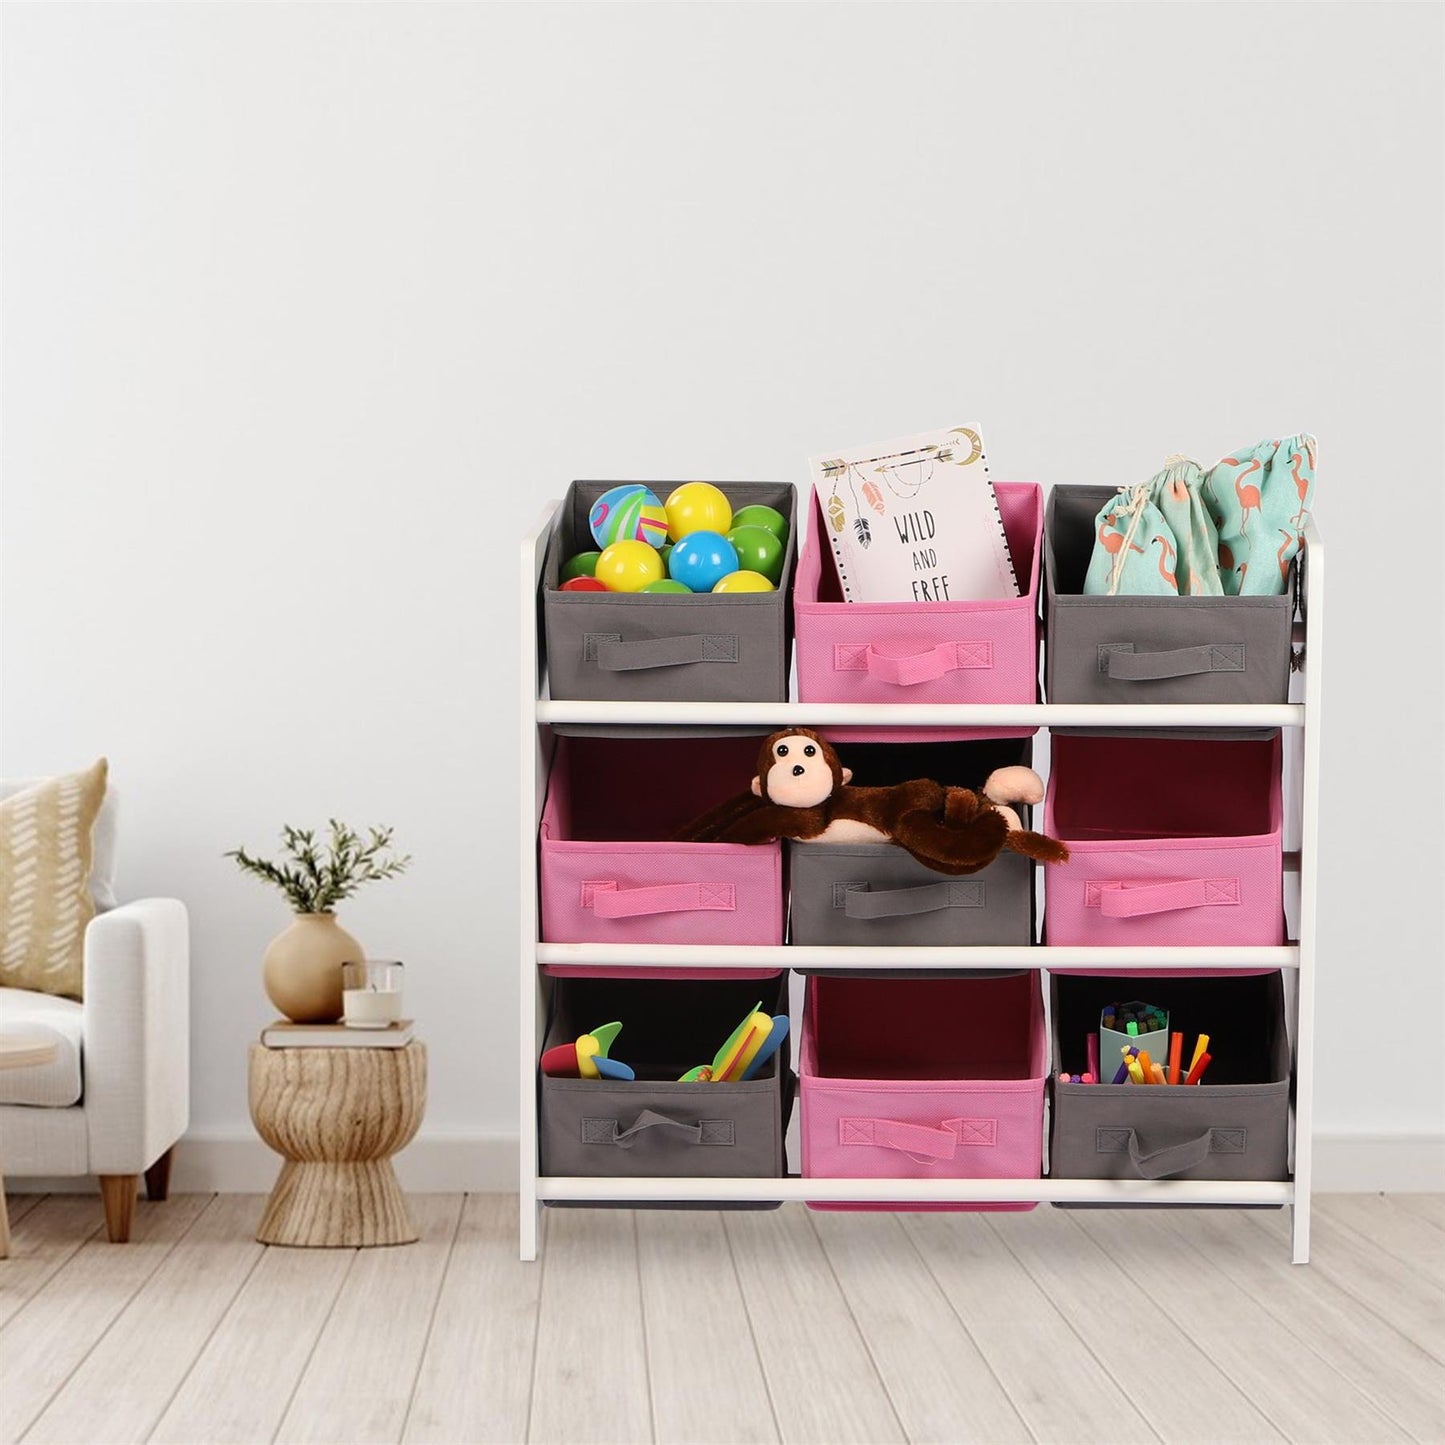 Keep Clutter at Bay with a Wooden Storage Unit